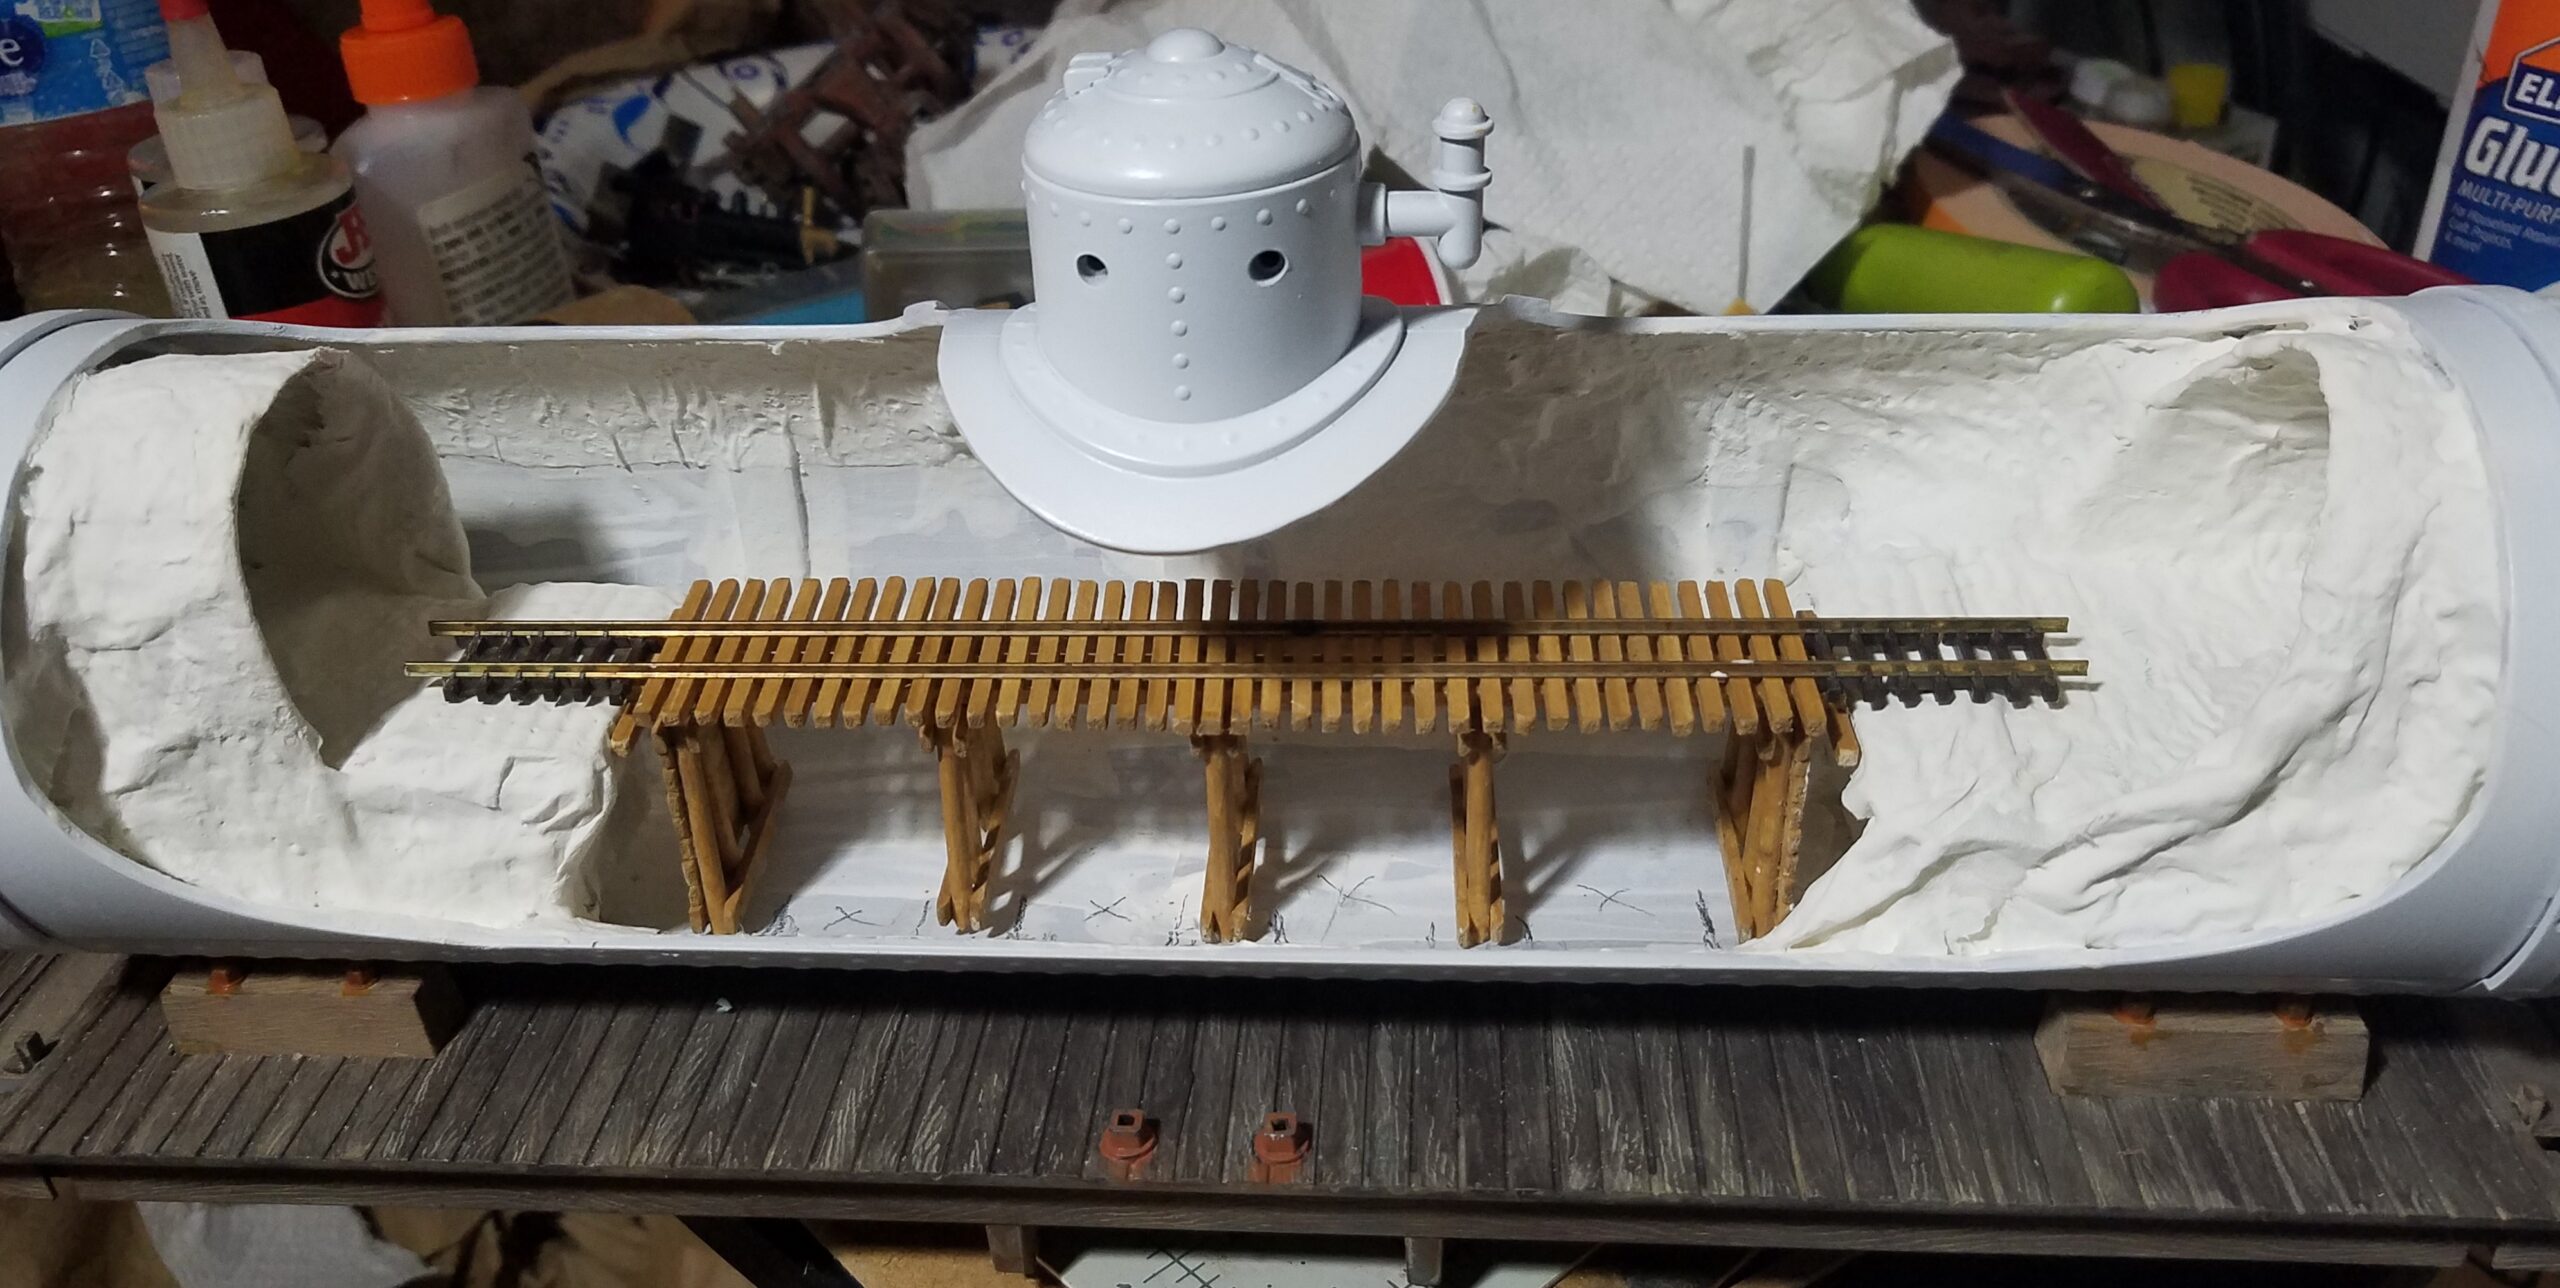 A large scale tank car model cut open with white plaster scenery and N scale track on a wooden trestle